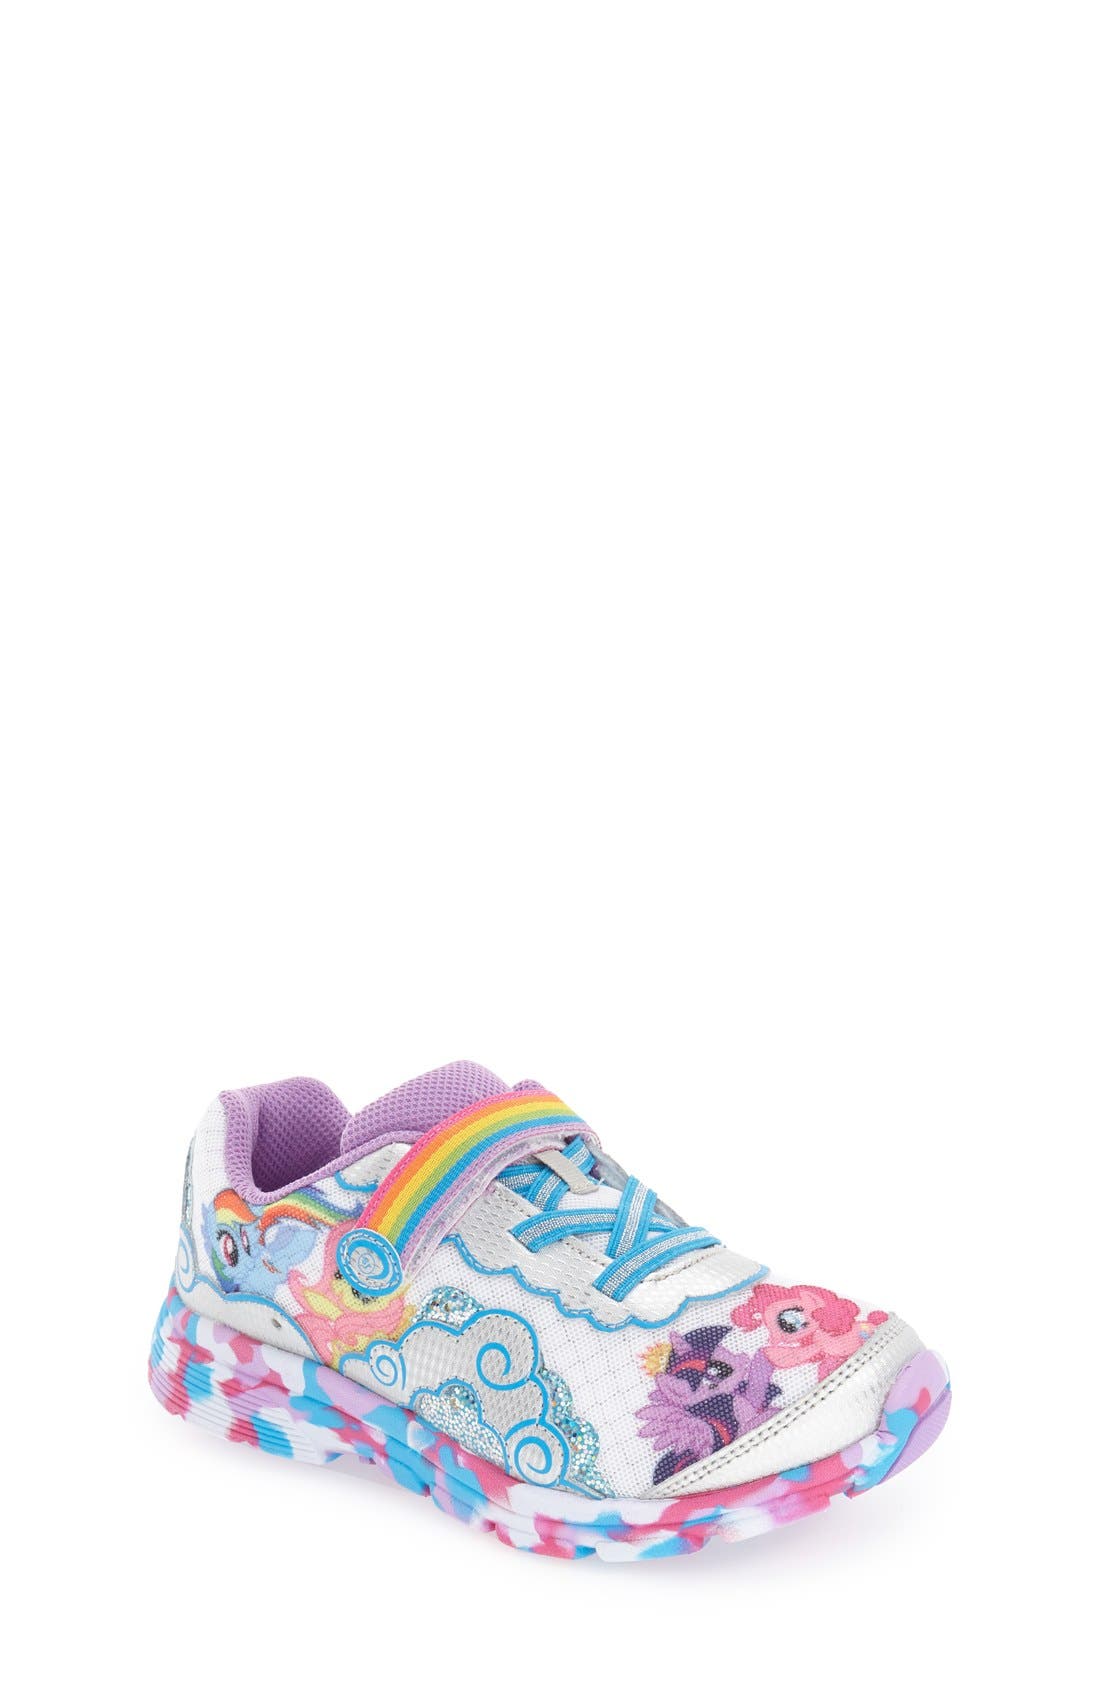 my little pony light up shoes